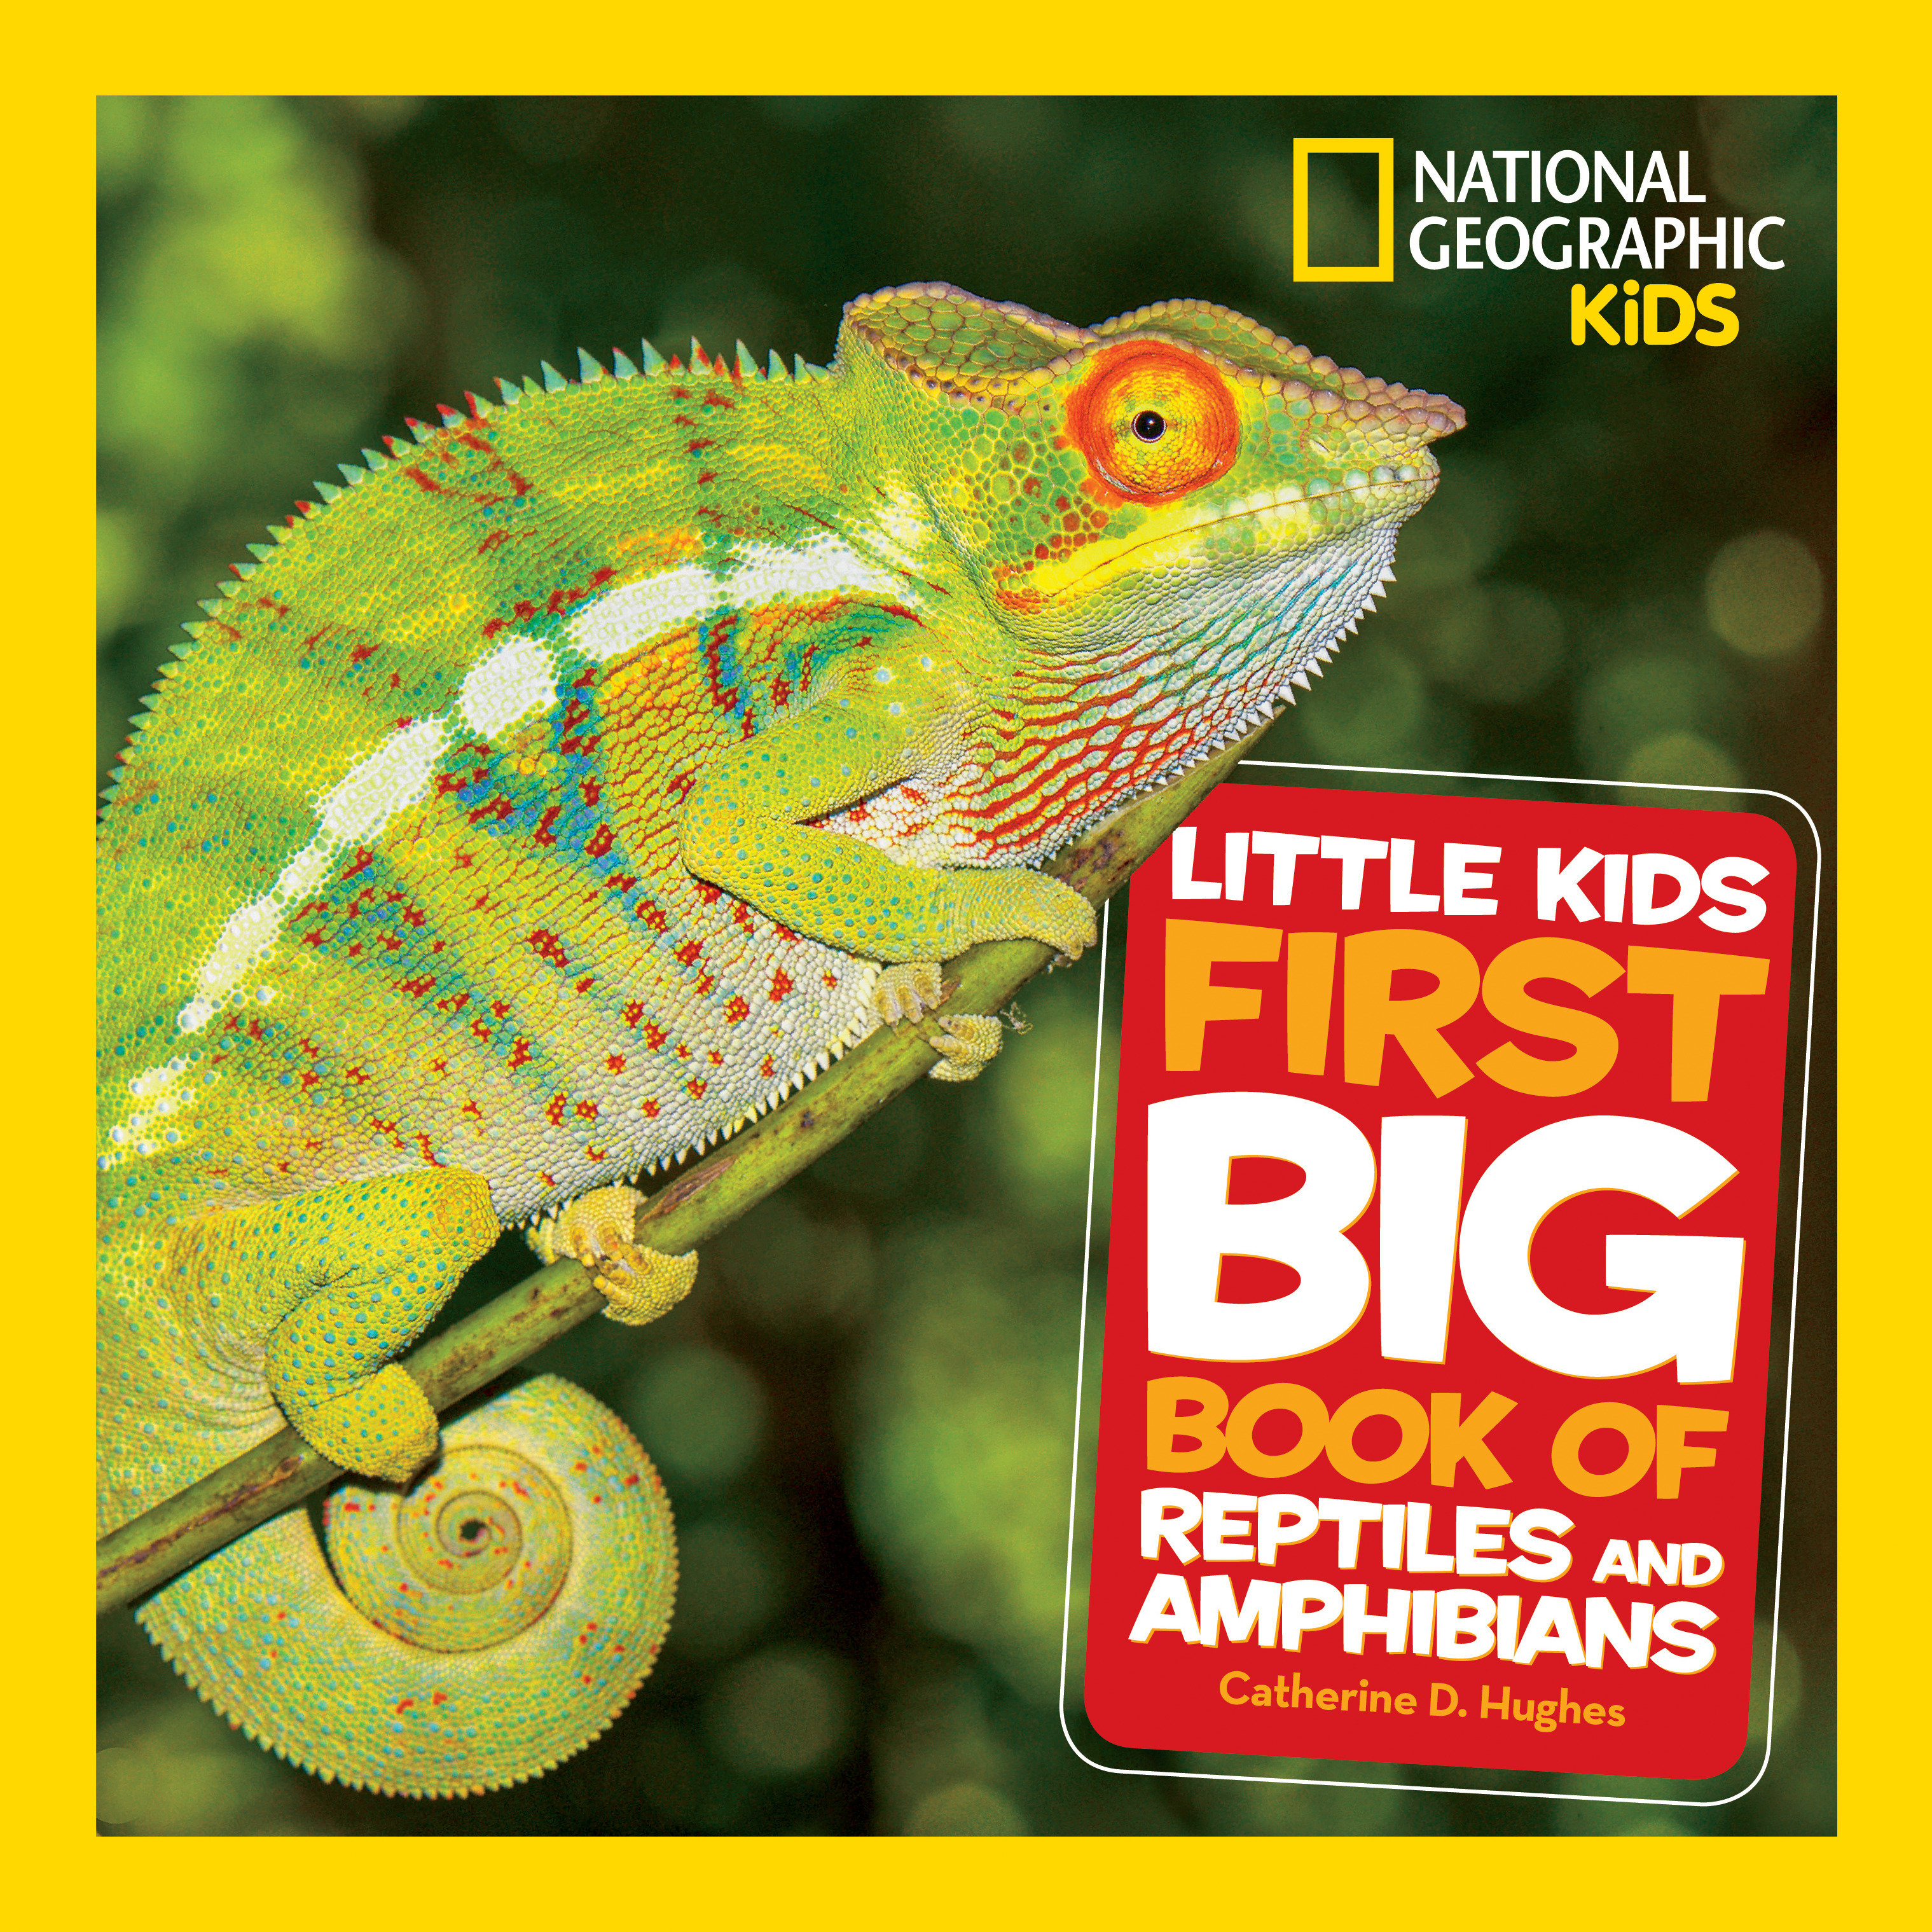 Little Kids First Big Book Of Reptiles And Amphibians (Hardcover Book)